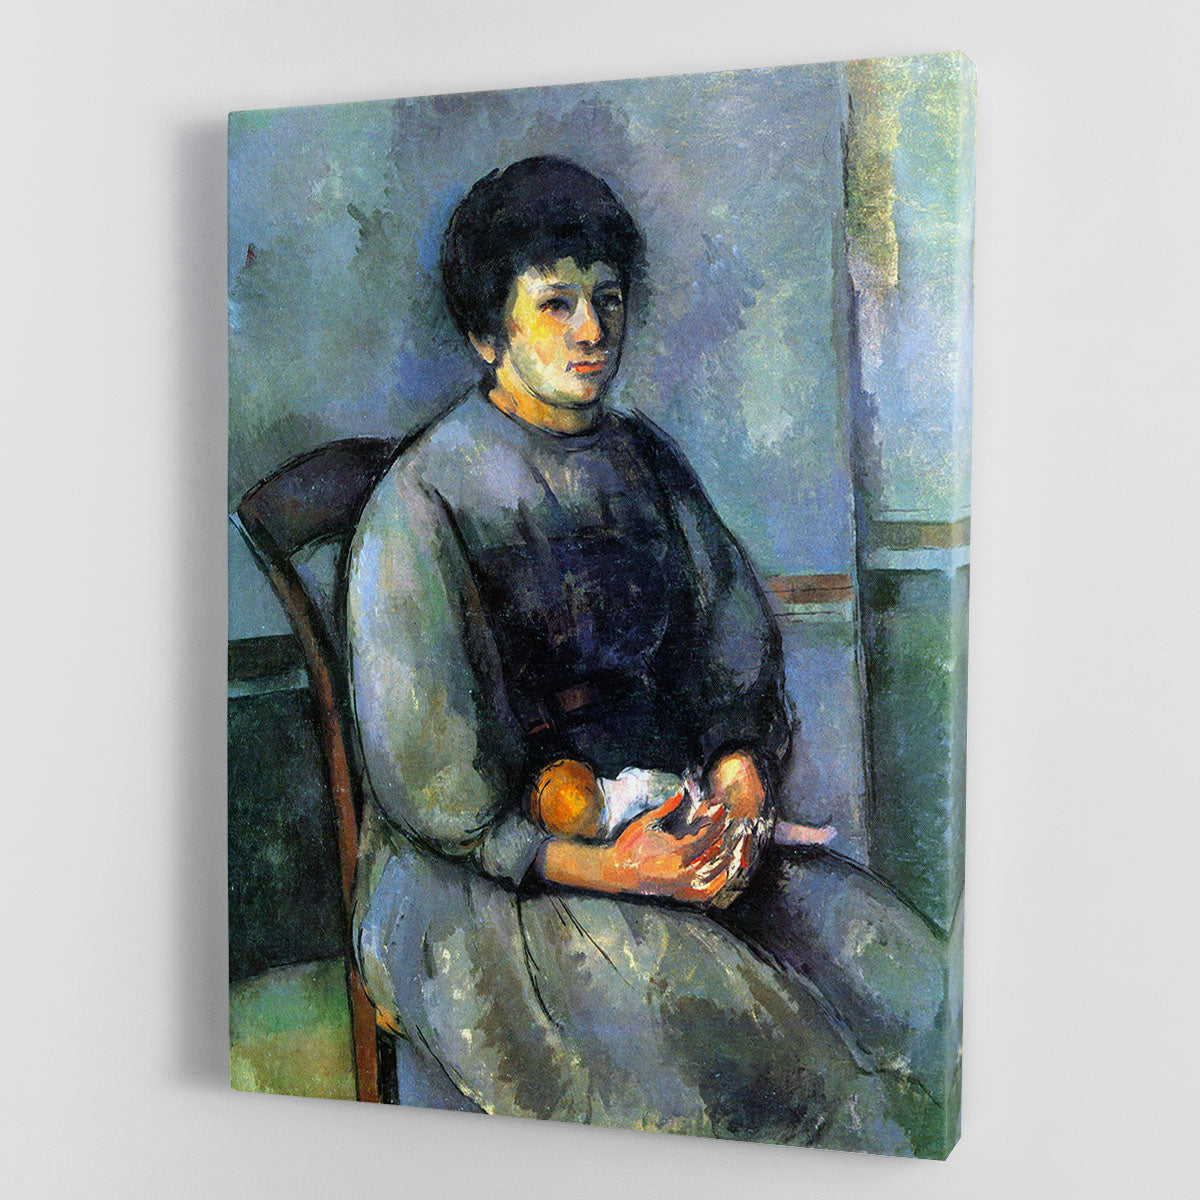 Woman with Doll by Cezanne Canvas Print or Poster - Canvas Art Rocks - 1